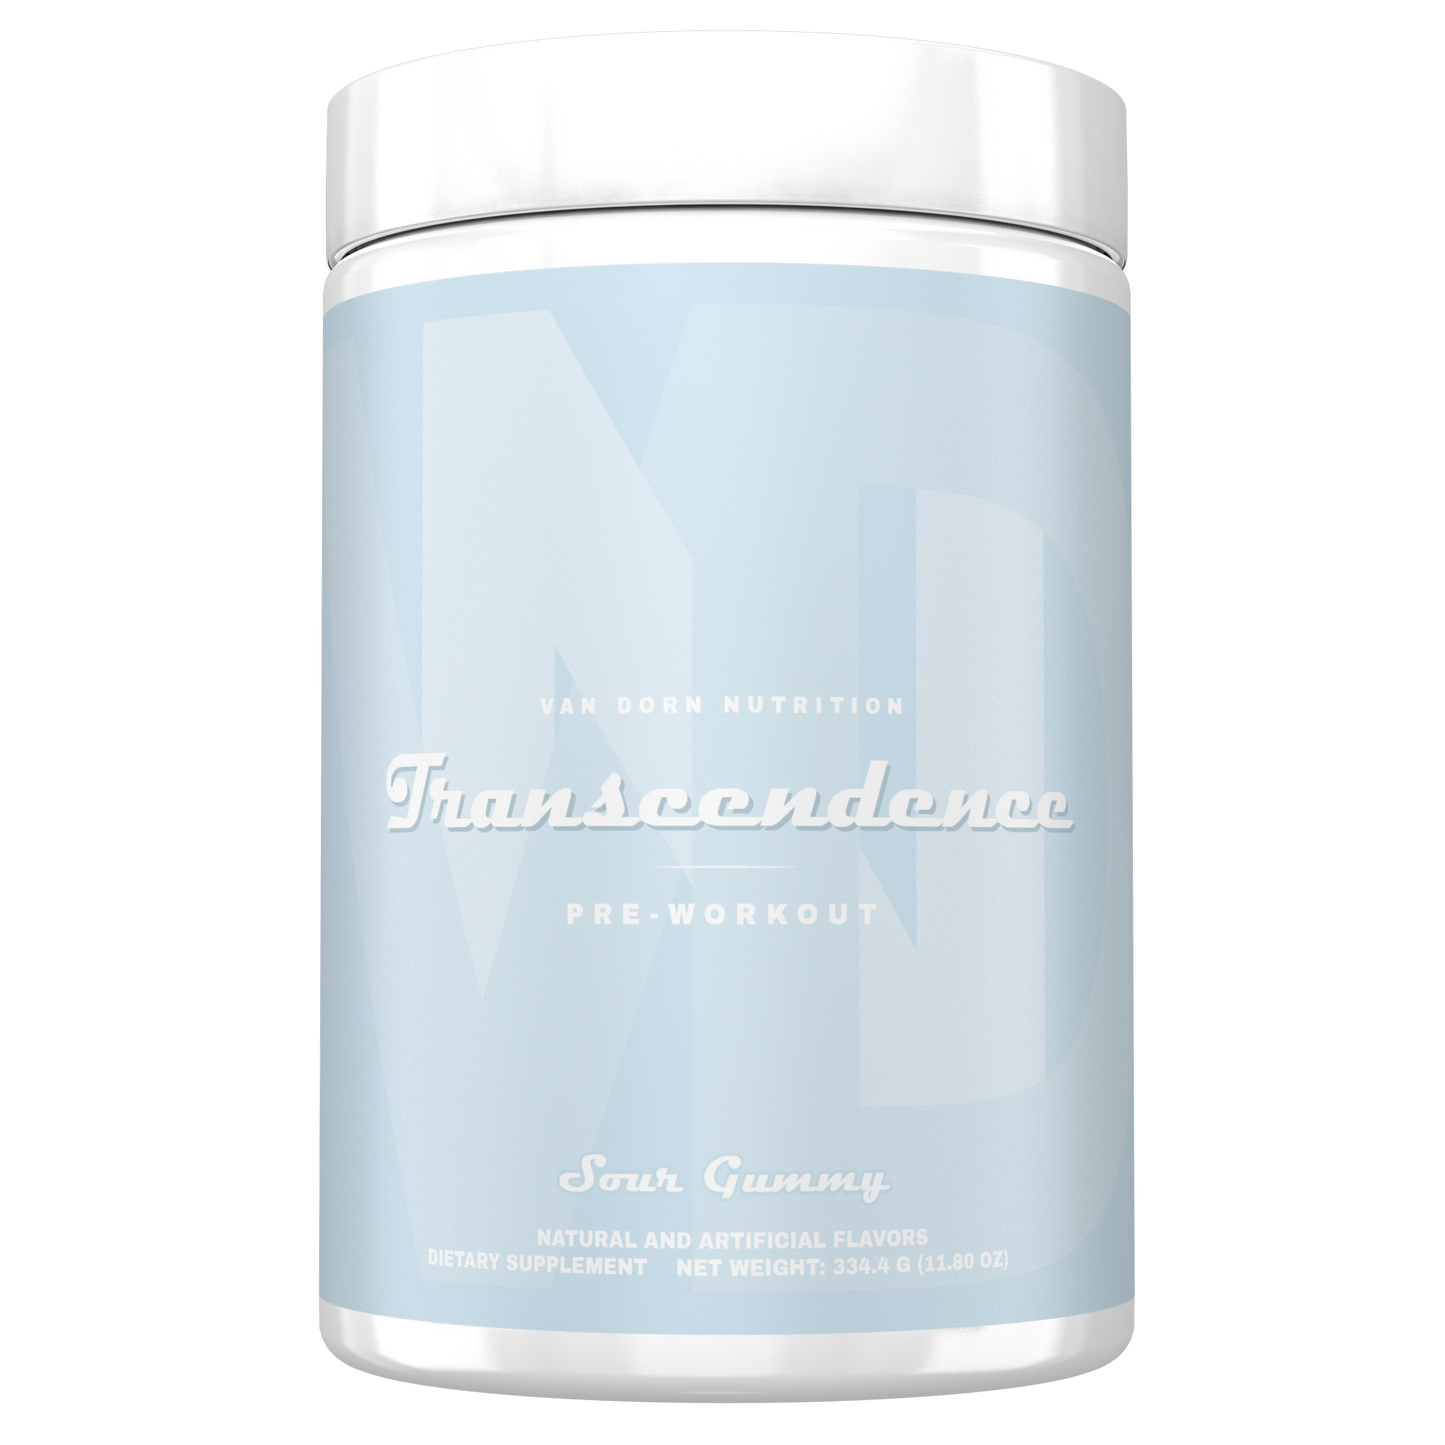 TRANSCENDENCE PRE-WORKOUT (New Release!)